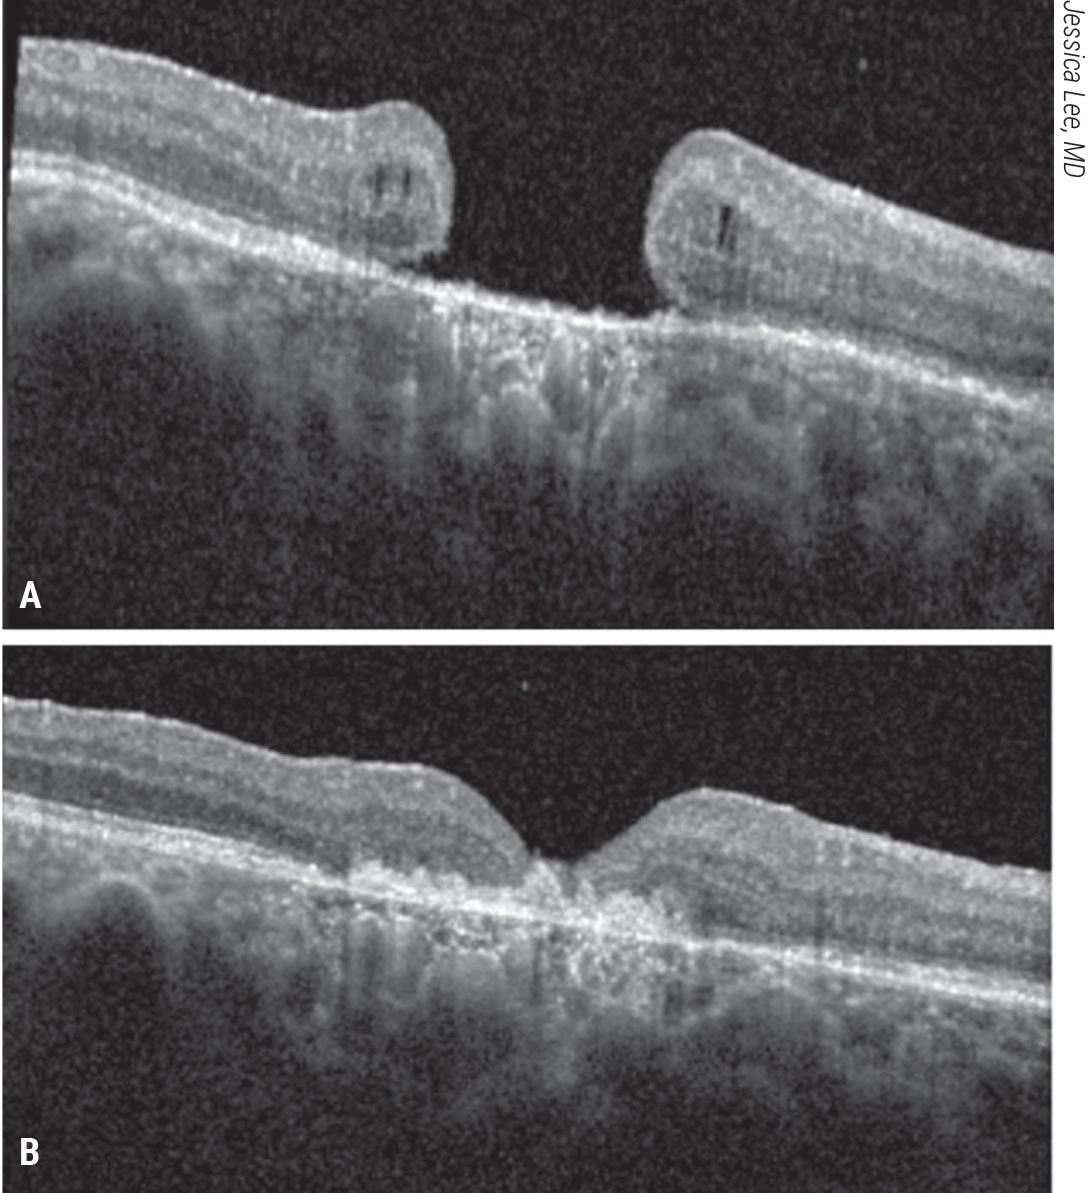 Figure 9. Subretinal human amniotic membrane for a refractory macular hole. A patient with count-fingers vision presented with a refractory macular hole after prior vitrectomy, ILM peeling and gas tamponade. A human amniotic membrane graft was placed in a subretinal position followed by gas tamponade. The patient’s macular hole closed and visual acuity improved to 20/200 (B). 